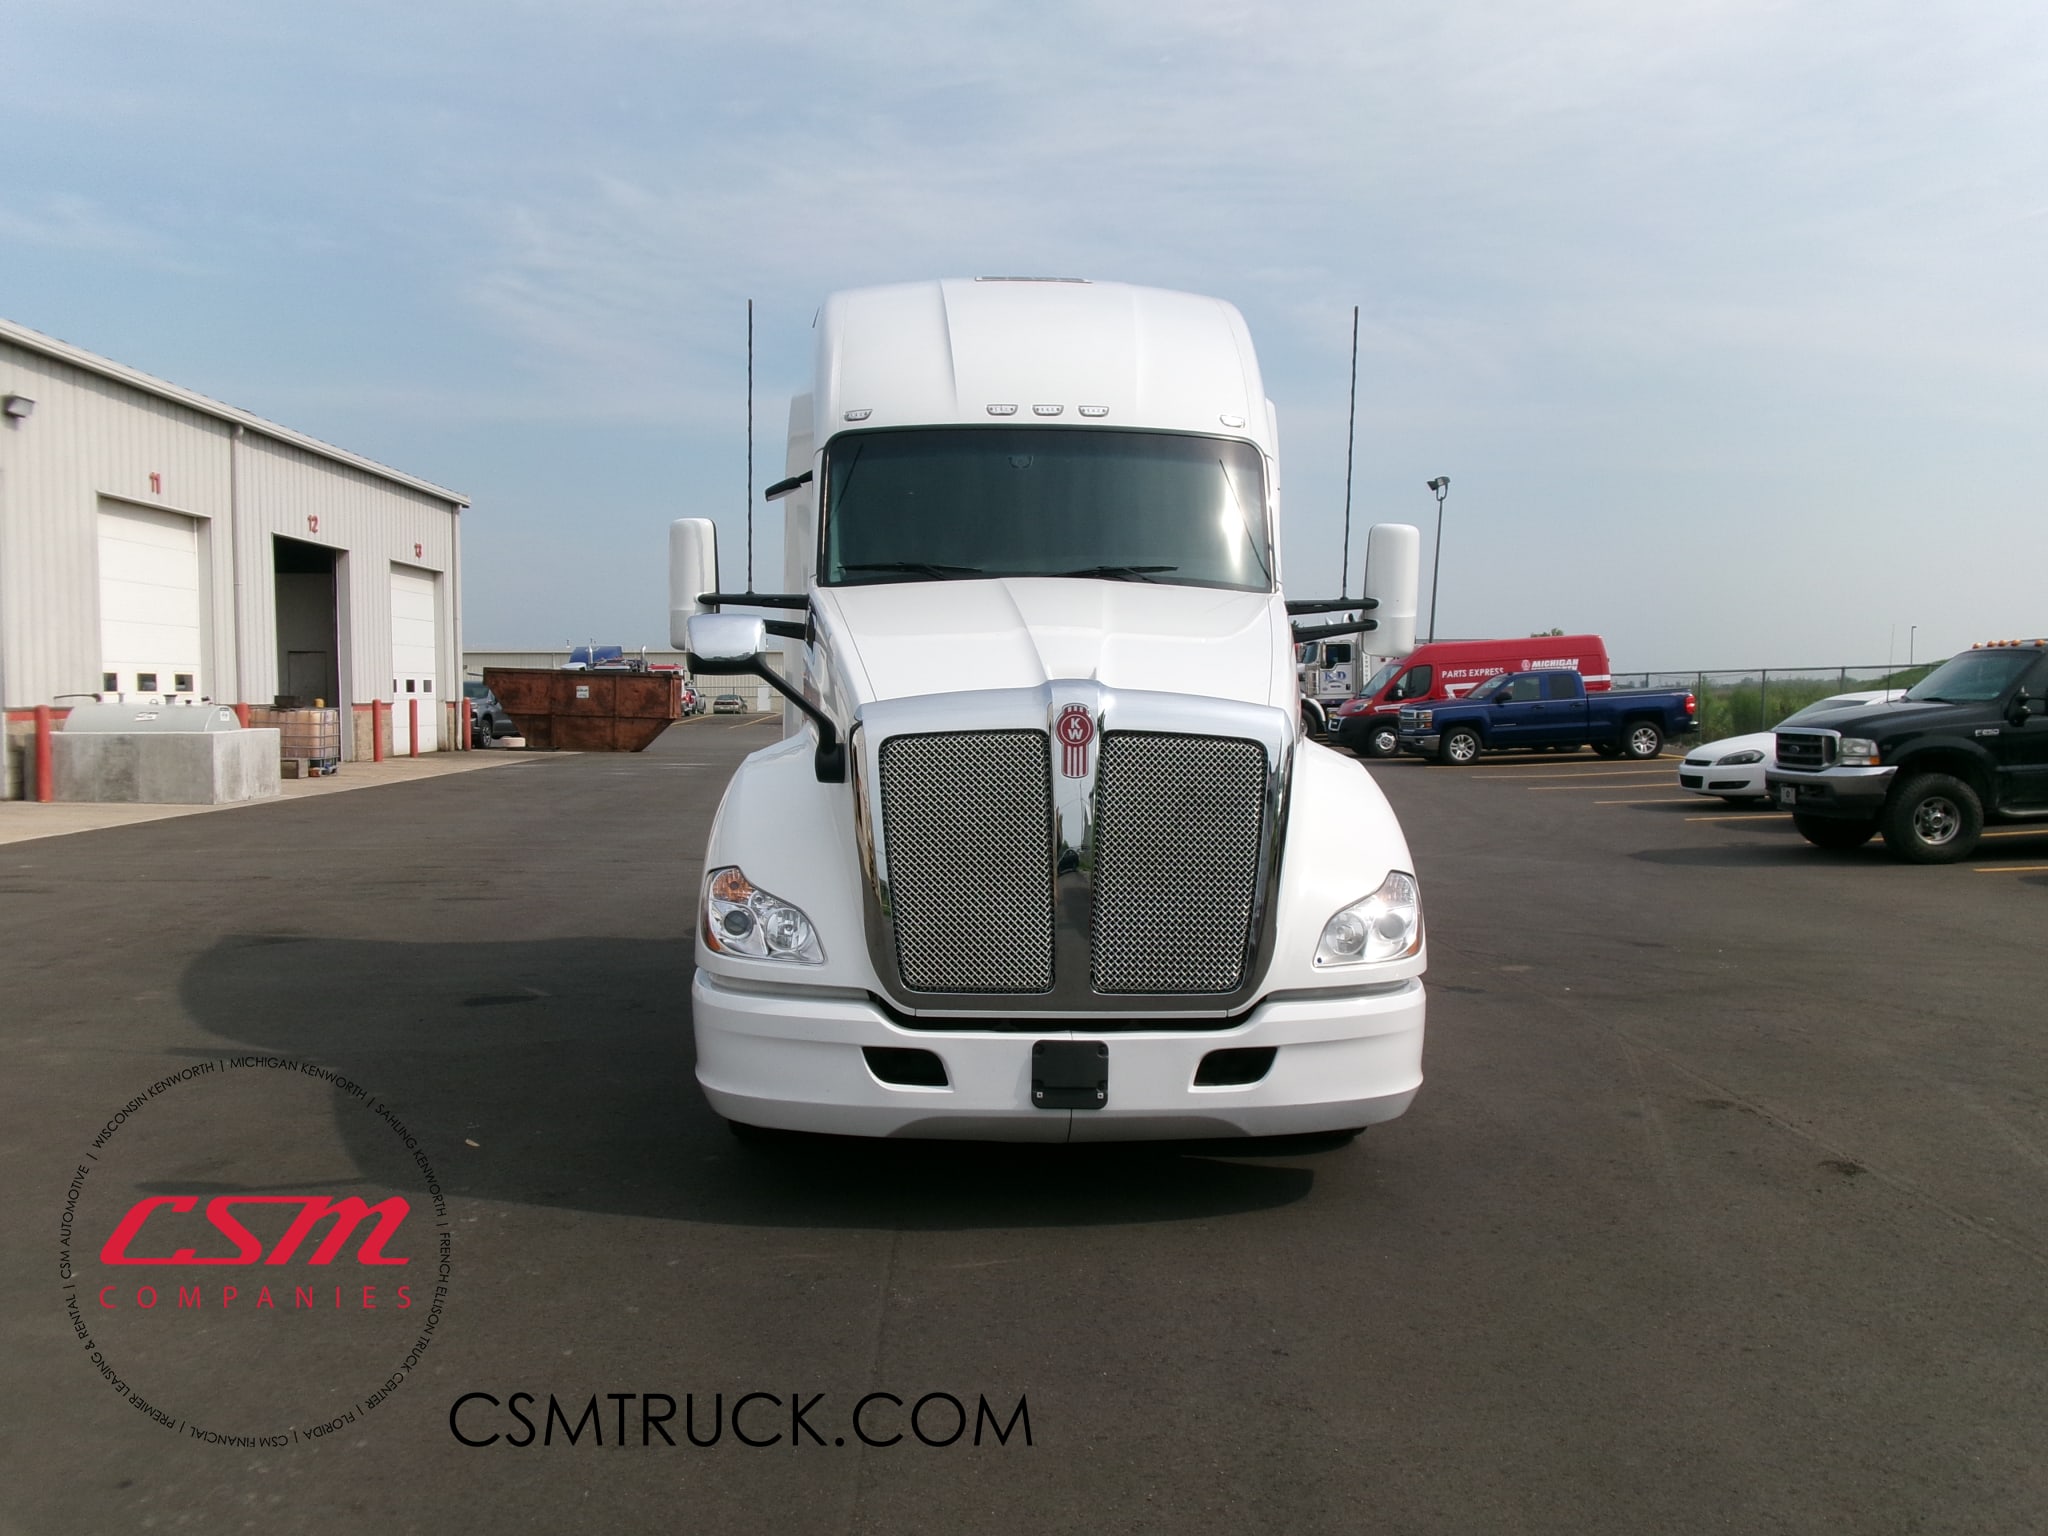 Exterior full front view for this 2020 Kenworth T680 (Stock number: ULJ418957)